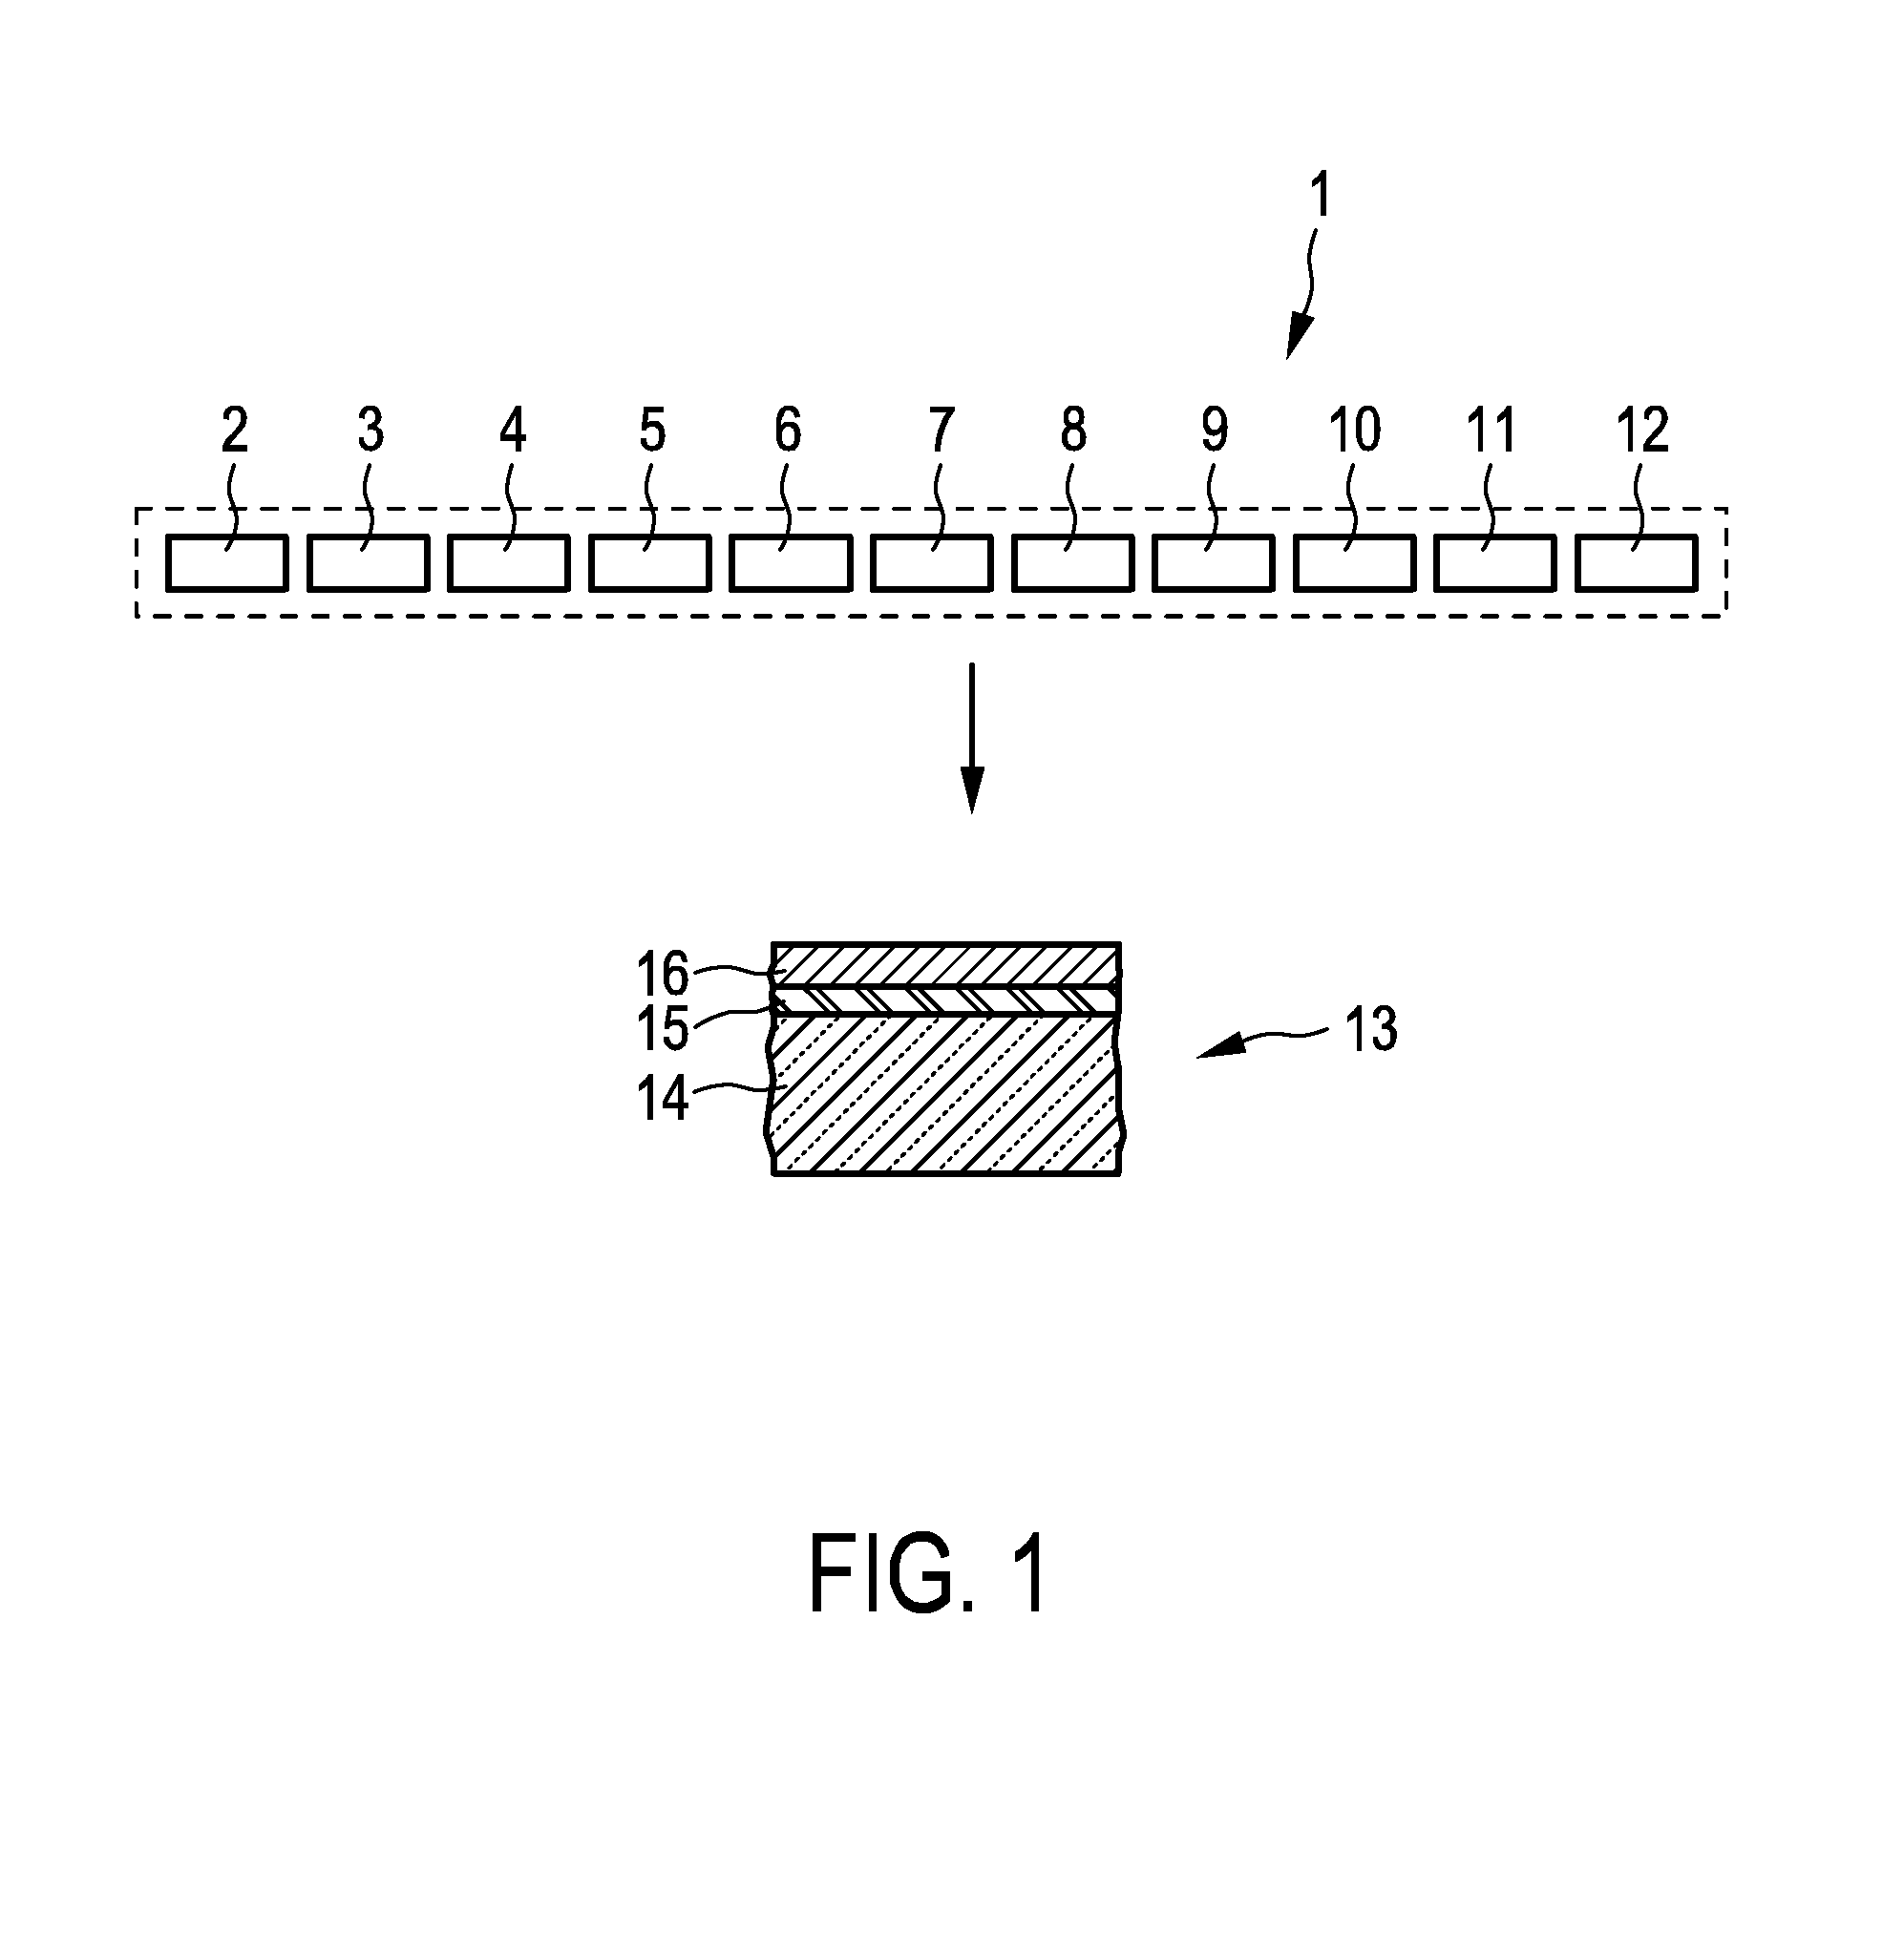 Fabrication apparatus for fabricating a patterned layer